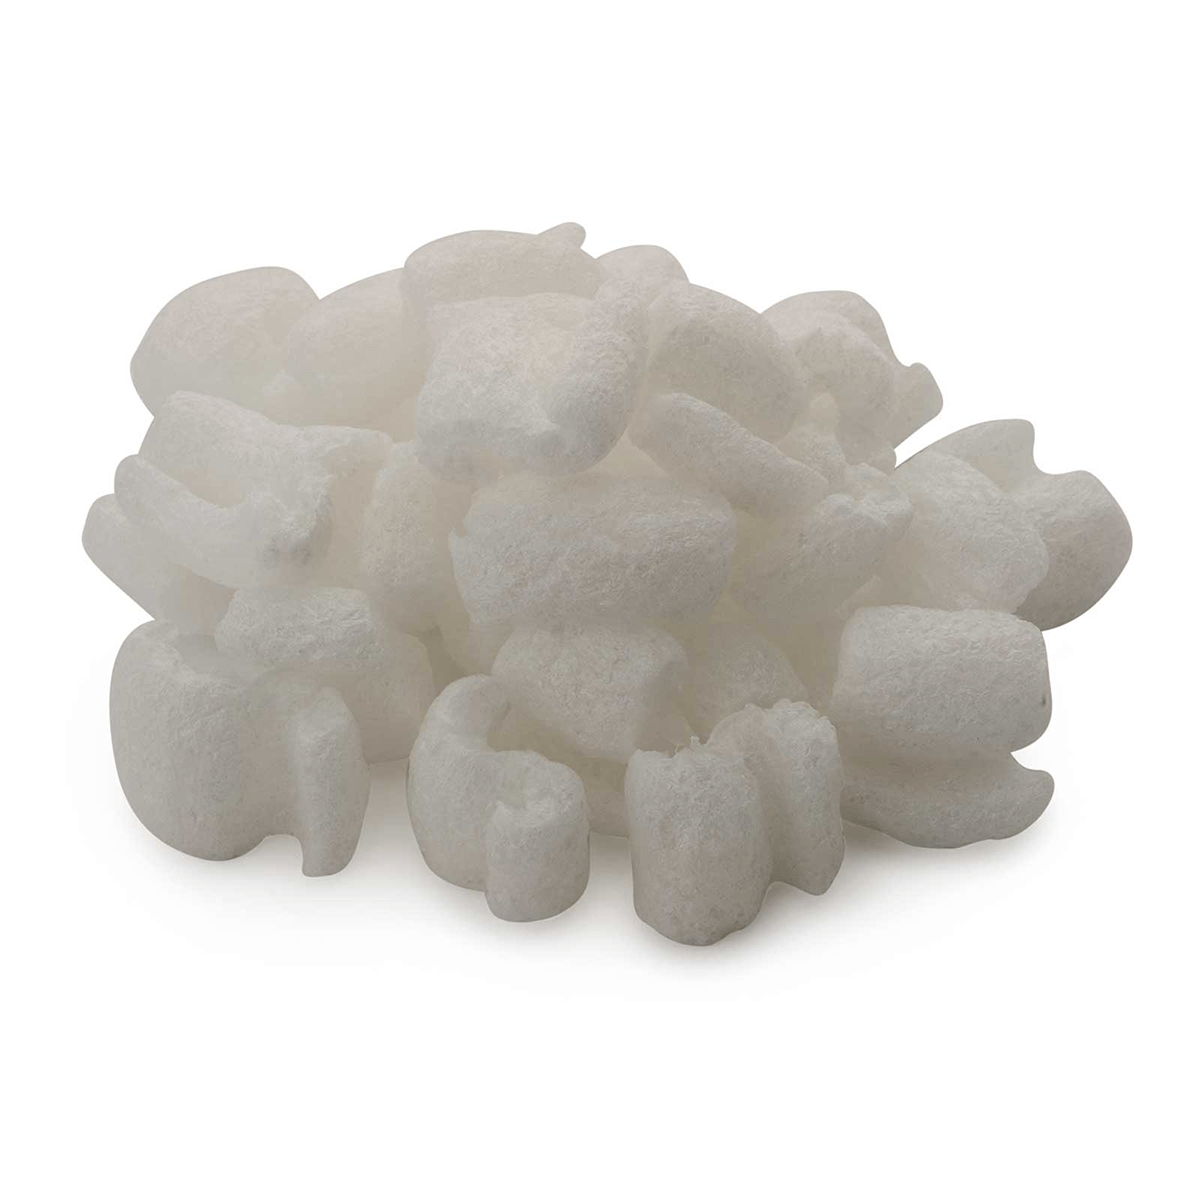 TOTALPACK® 20 Cubic Feet White Loose Fill Packing Peanuts - Loose